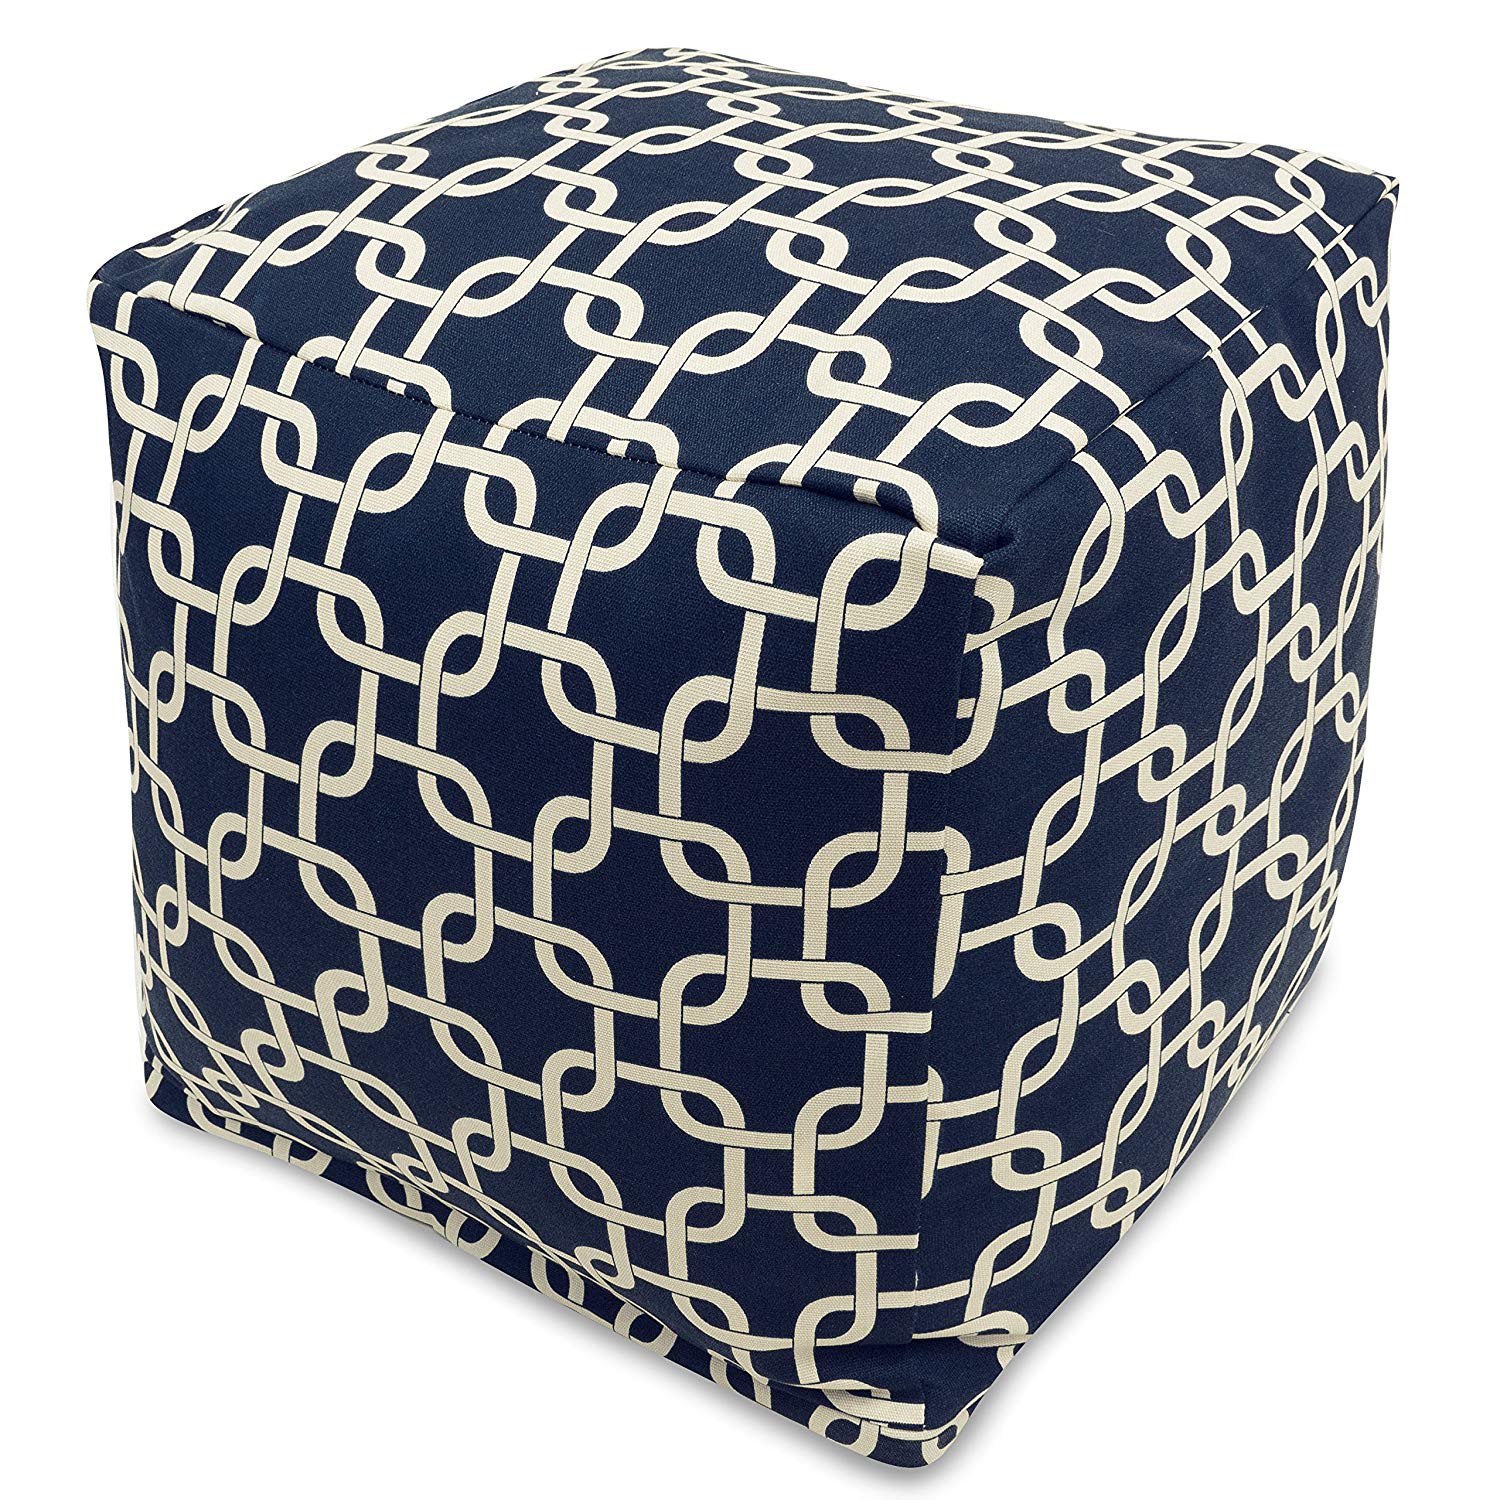 Majestic Home Goods Links Indoor/Outdoor Bean Bag Cube, Multiple Colors - image 1 of 6